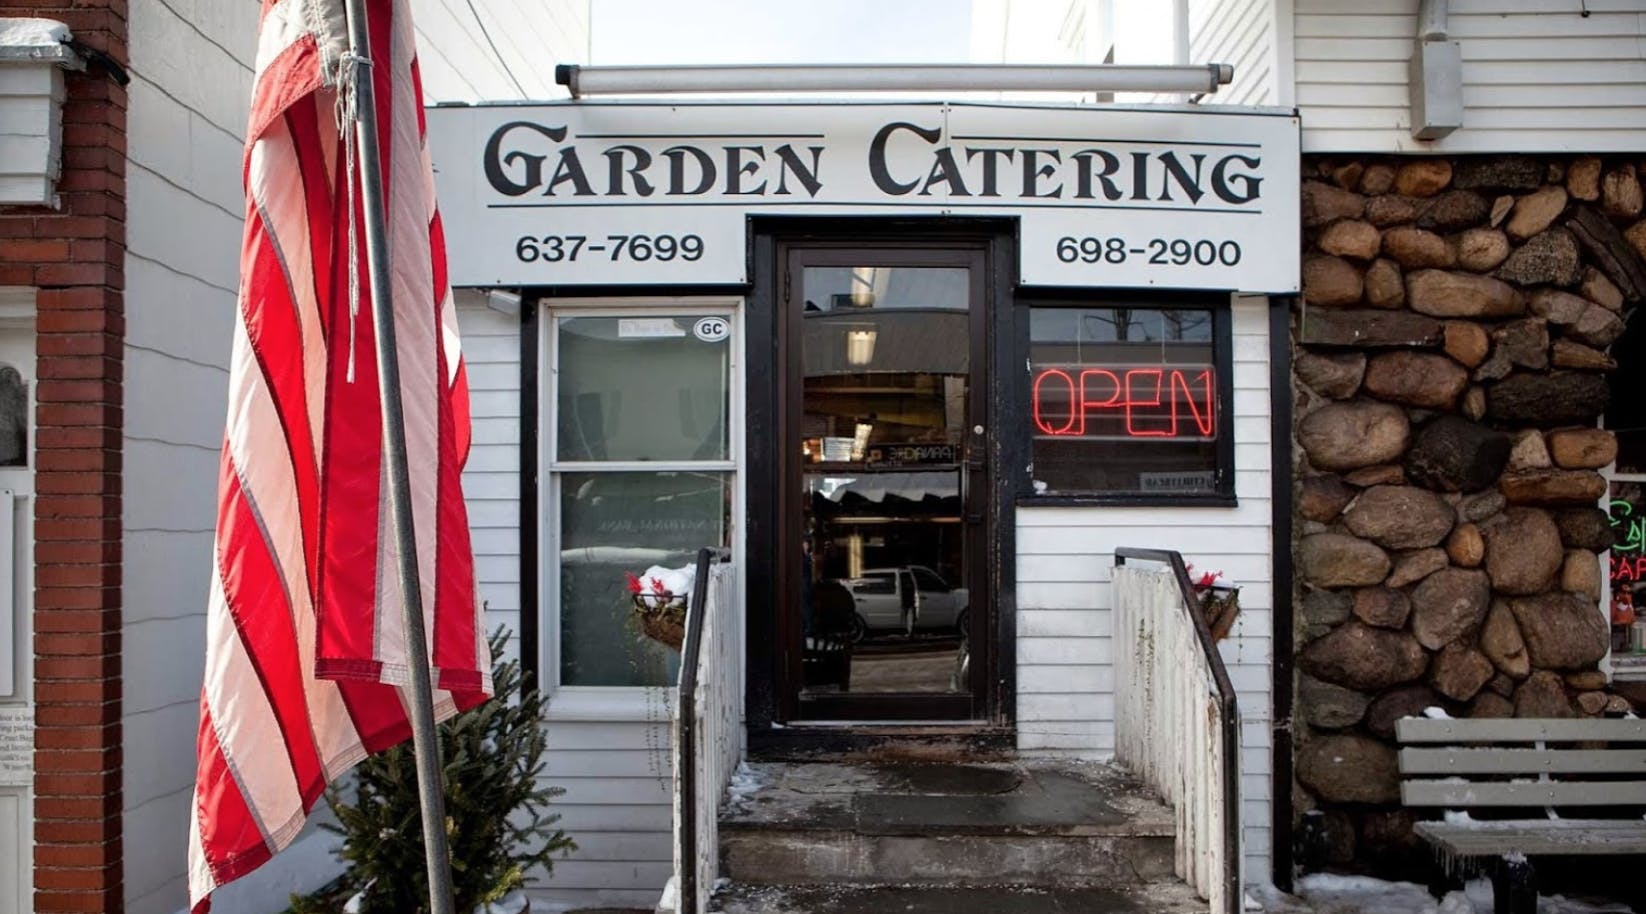 Norwalk Hours Location Garden Catering The Best Nuggets You Ll Ever Have Locations In Ct Ny